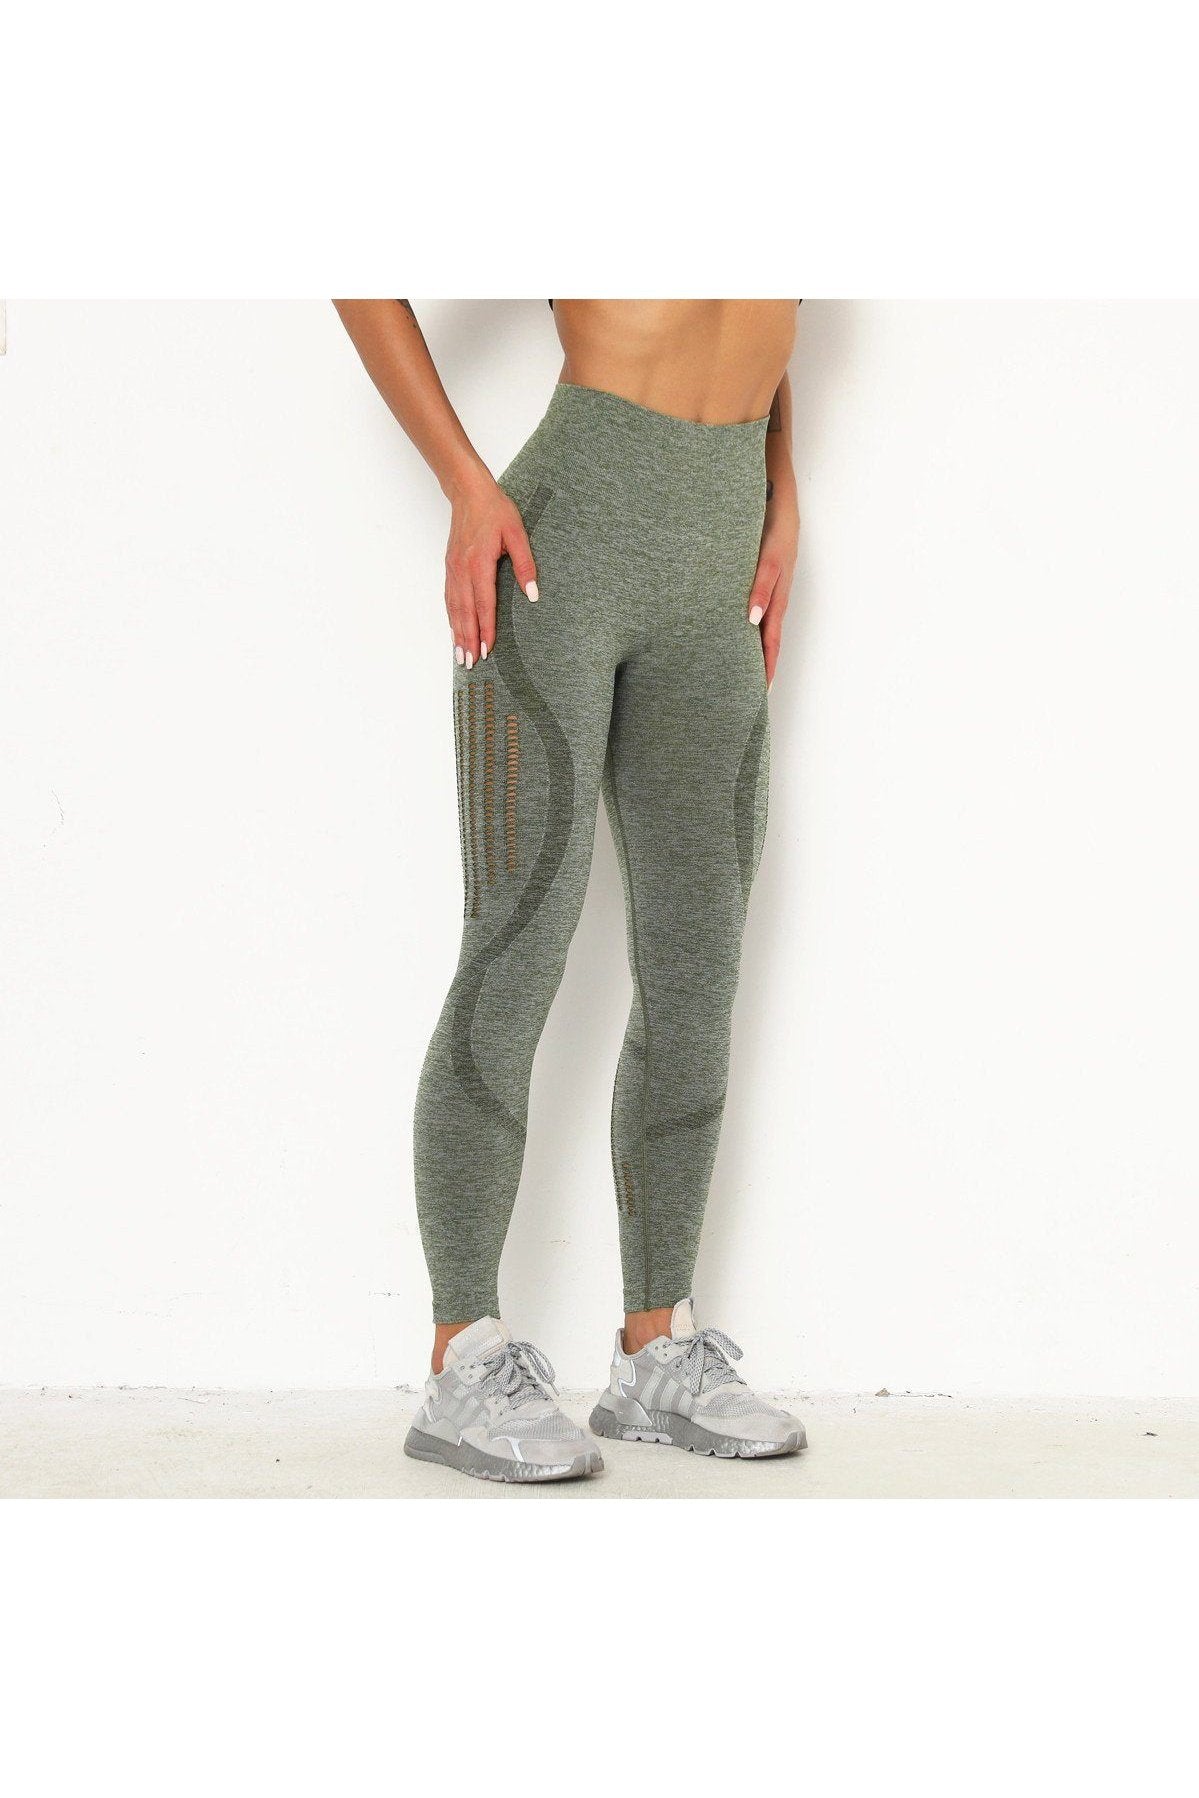 Seamless High-Waisted Hollow-Out Stretch Yoga Pants